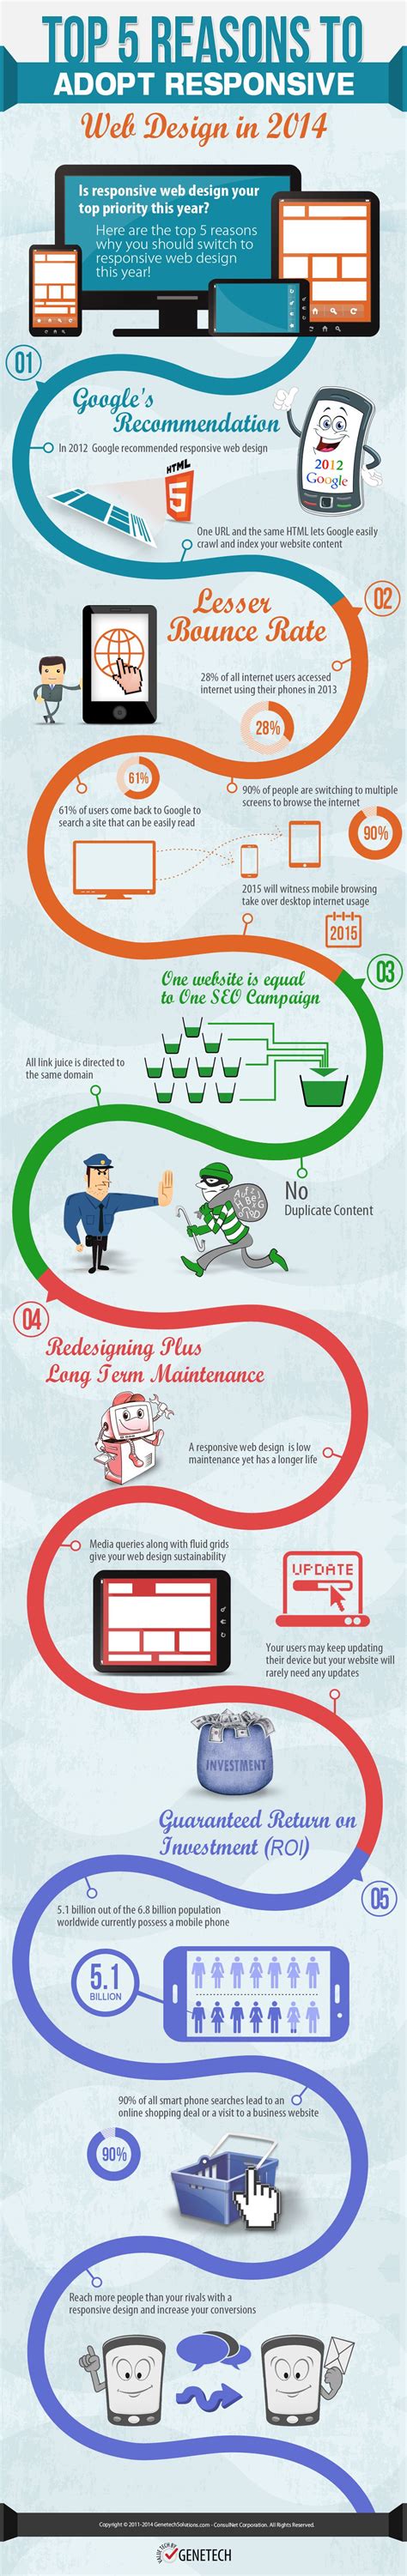 Top 5 Reasons To Adopt Responsive Web Design In 2014 Infographic